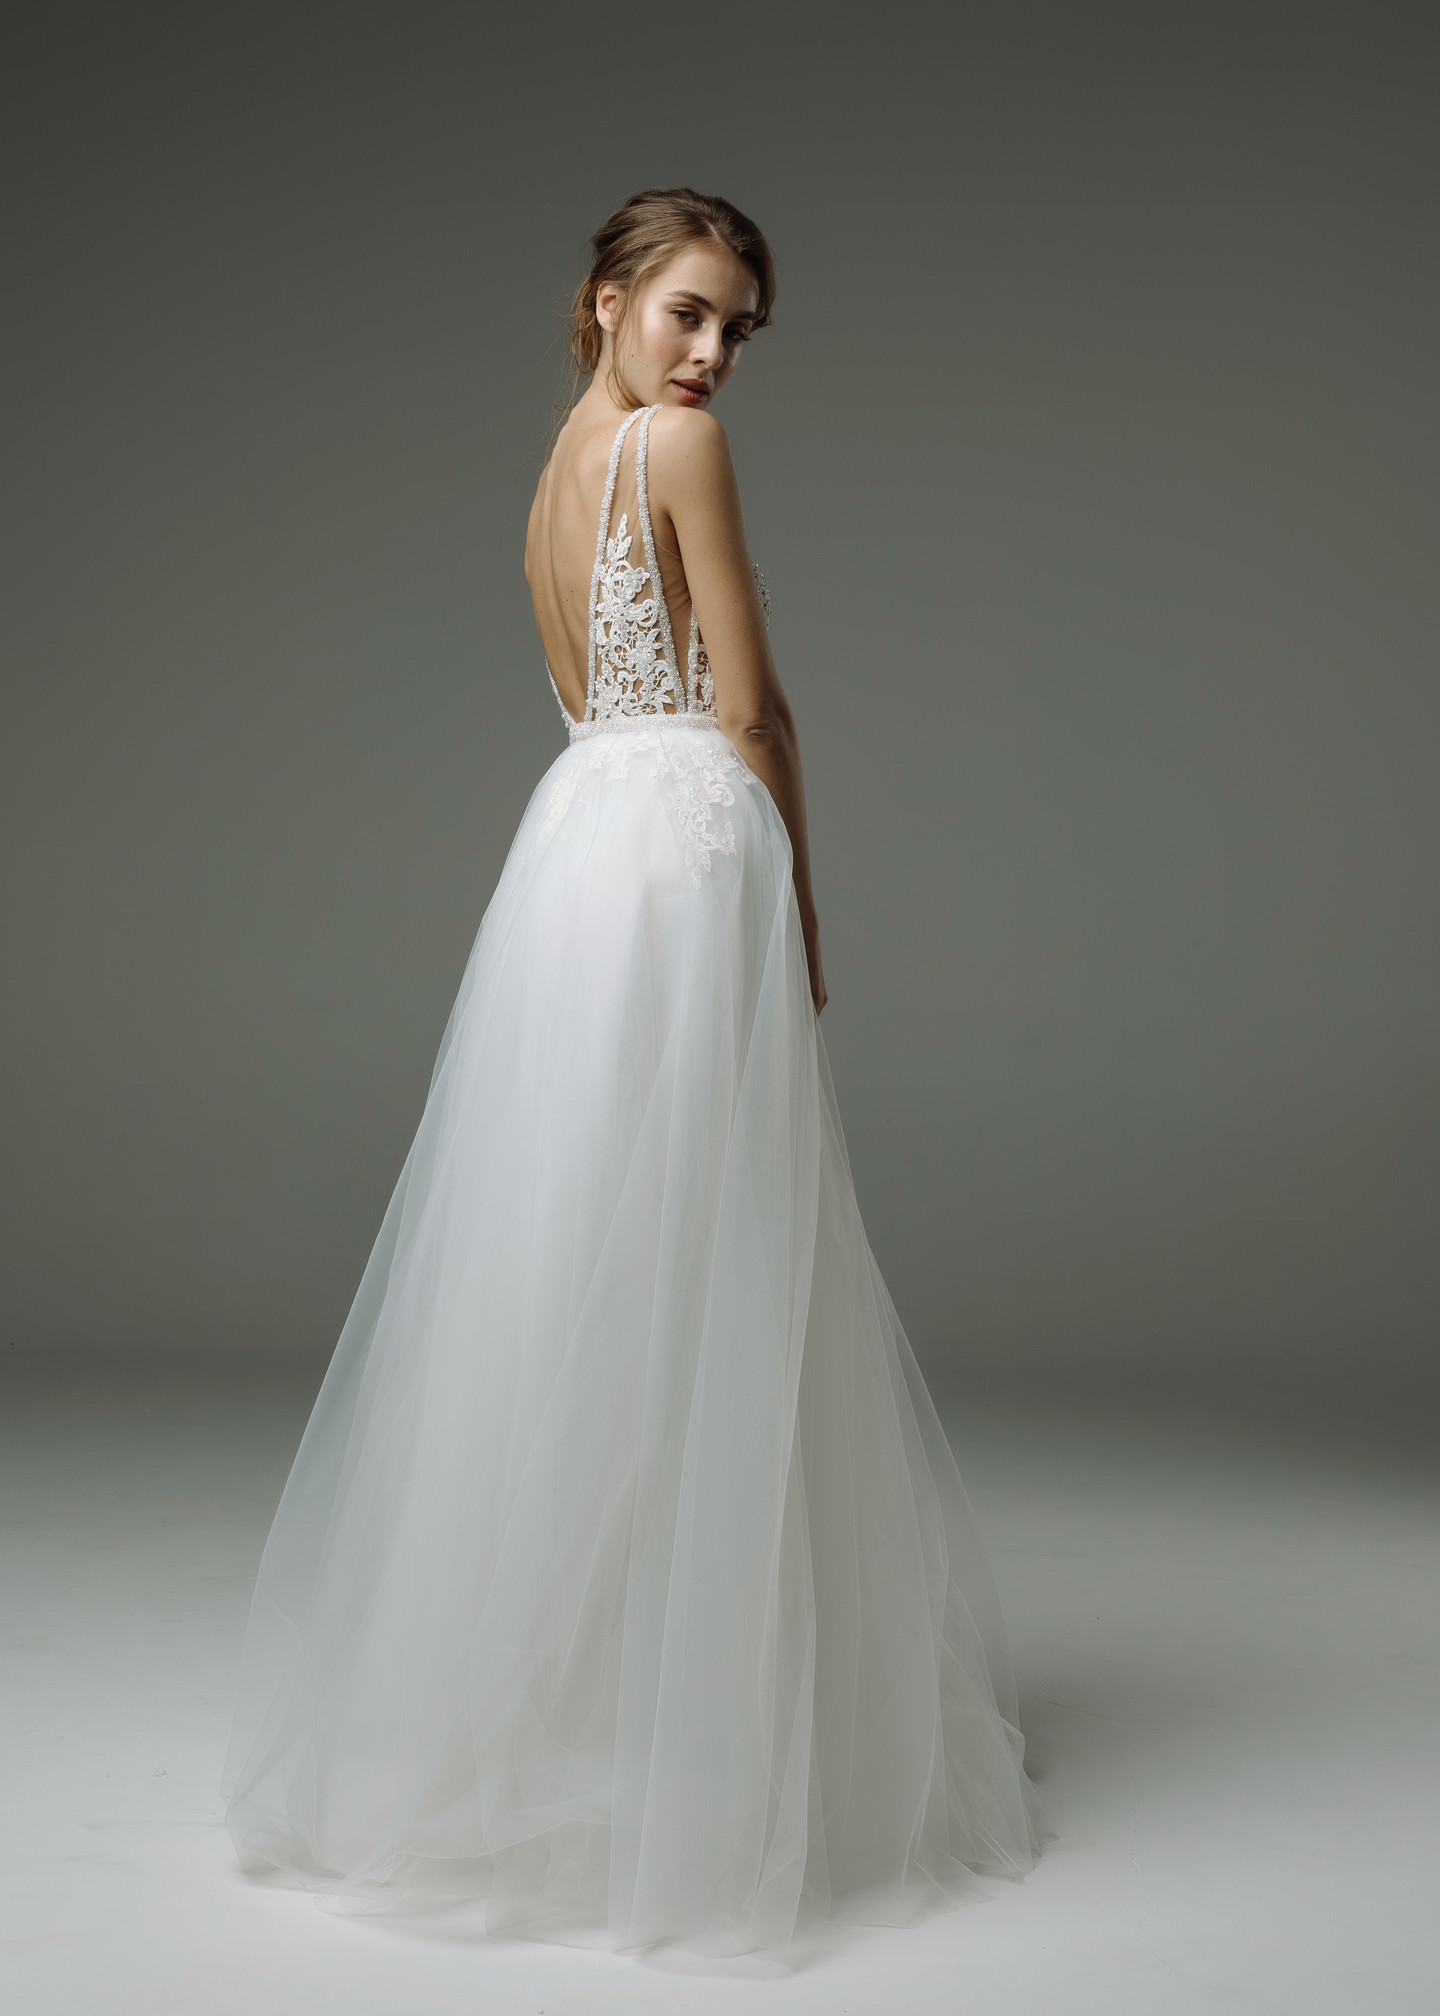 Sylvian gown, 2019, couture, dress, bridal, off-white, lace, A-line, tulle, popular